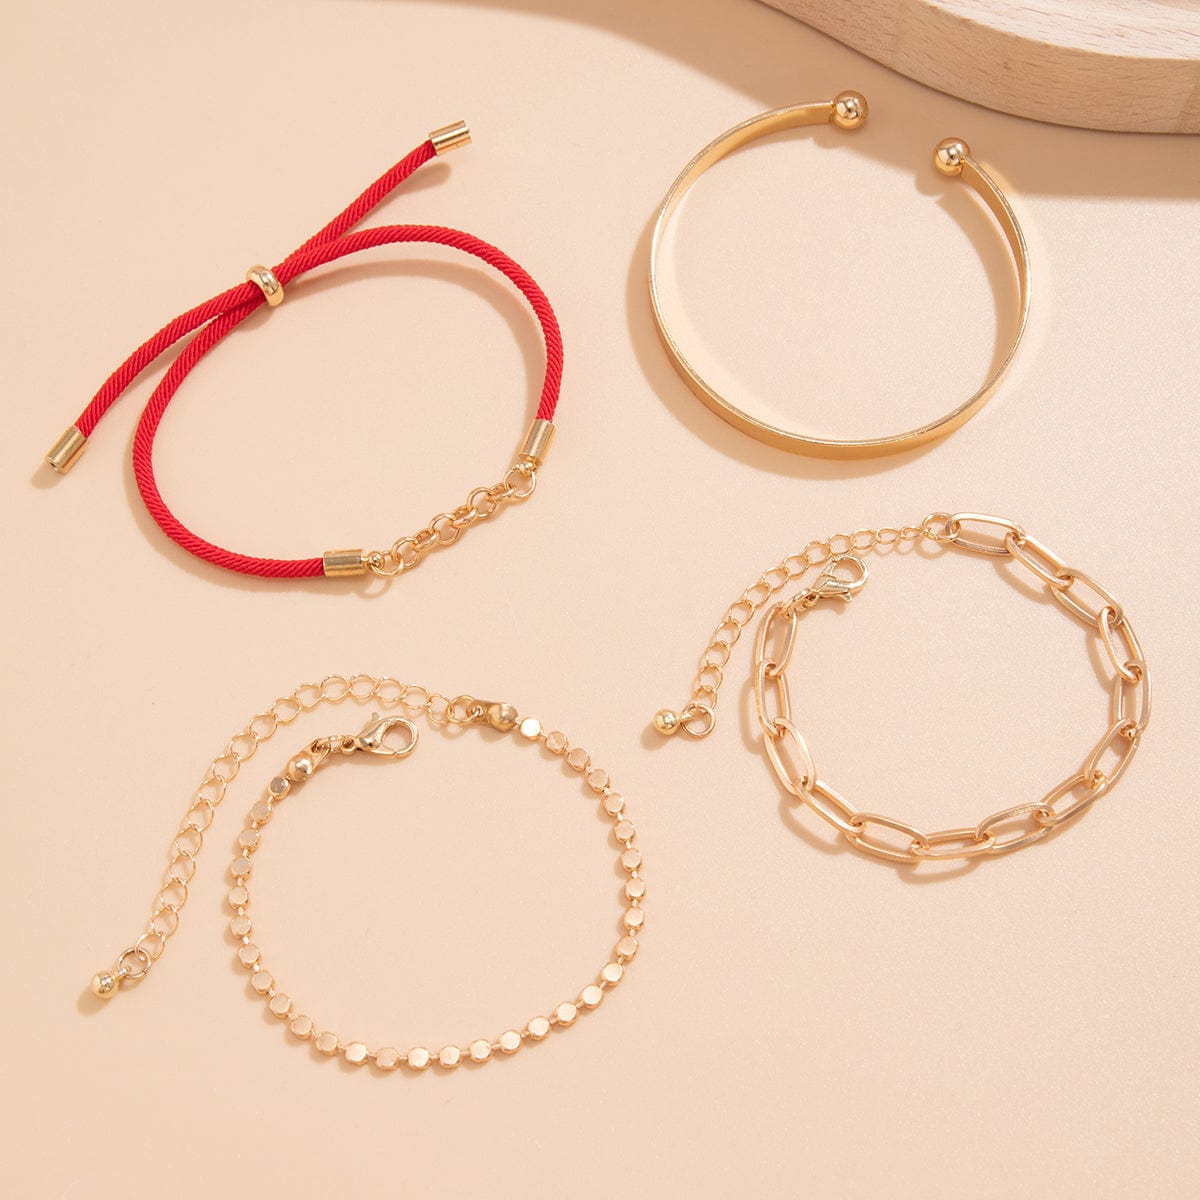 Trendy Layered Knotted String Cable Chain Bangle Bracelet Set - ArtGalleryZen